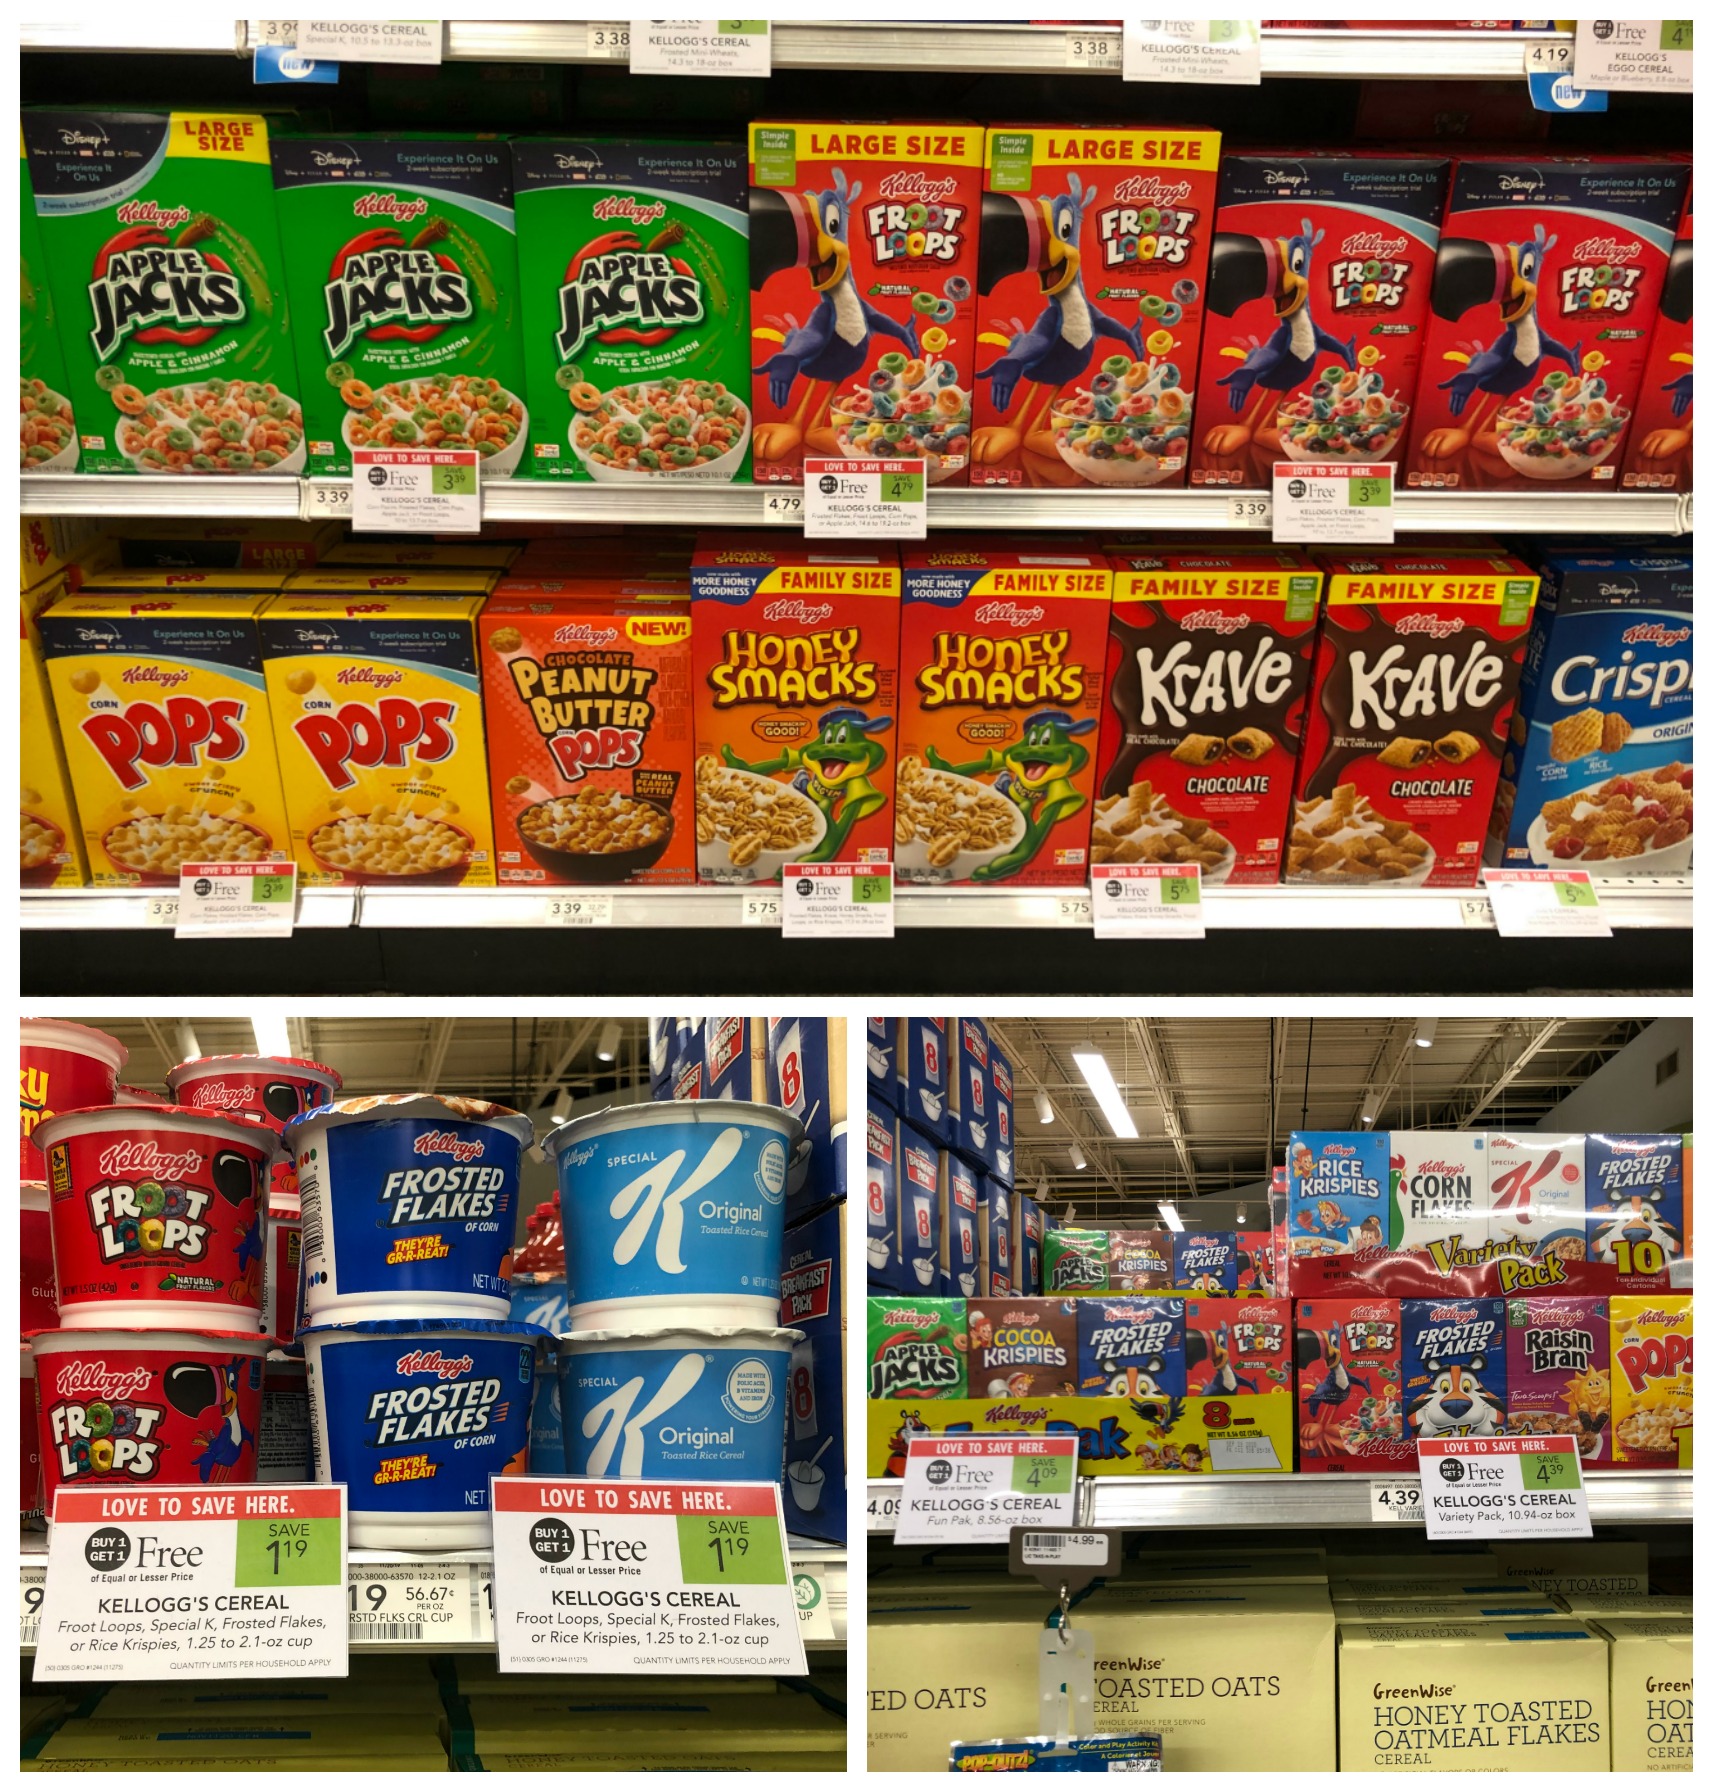 Big News!! All Kellogg's Cereals Are Buy One Get One FREE This Week At Publix! on I Heart Publix